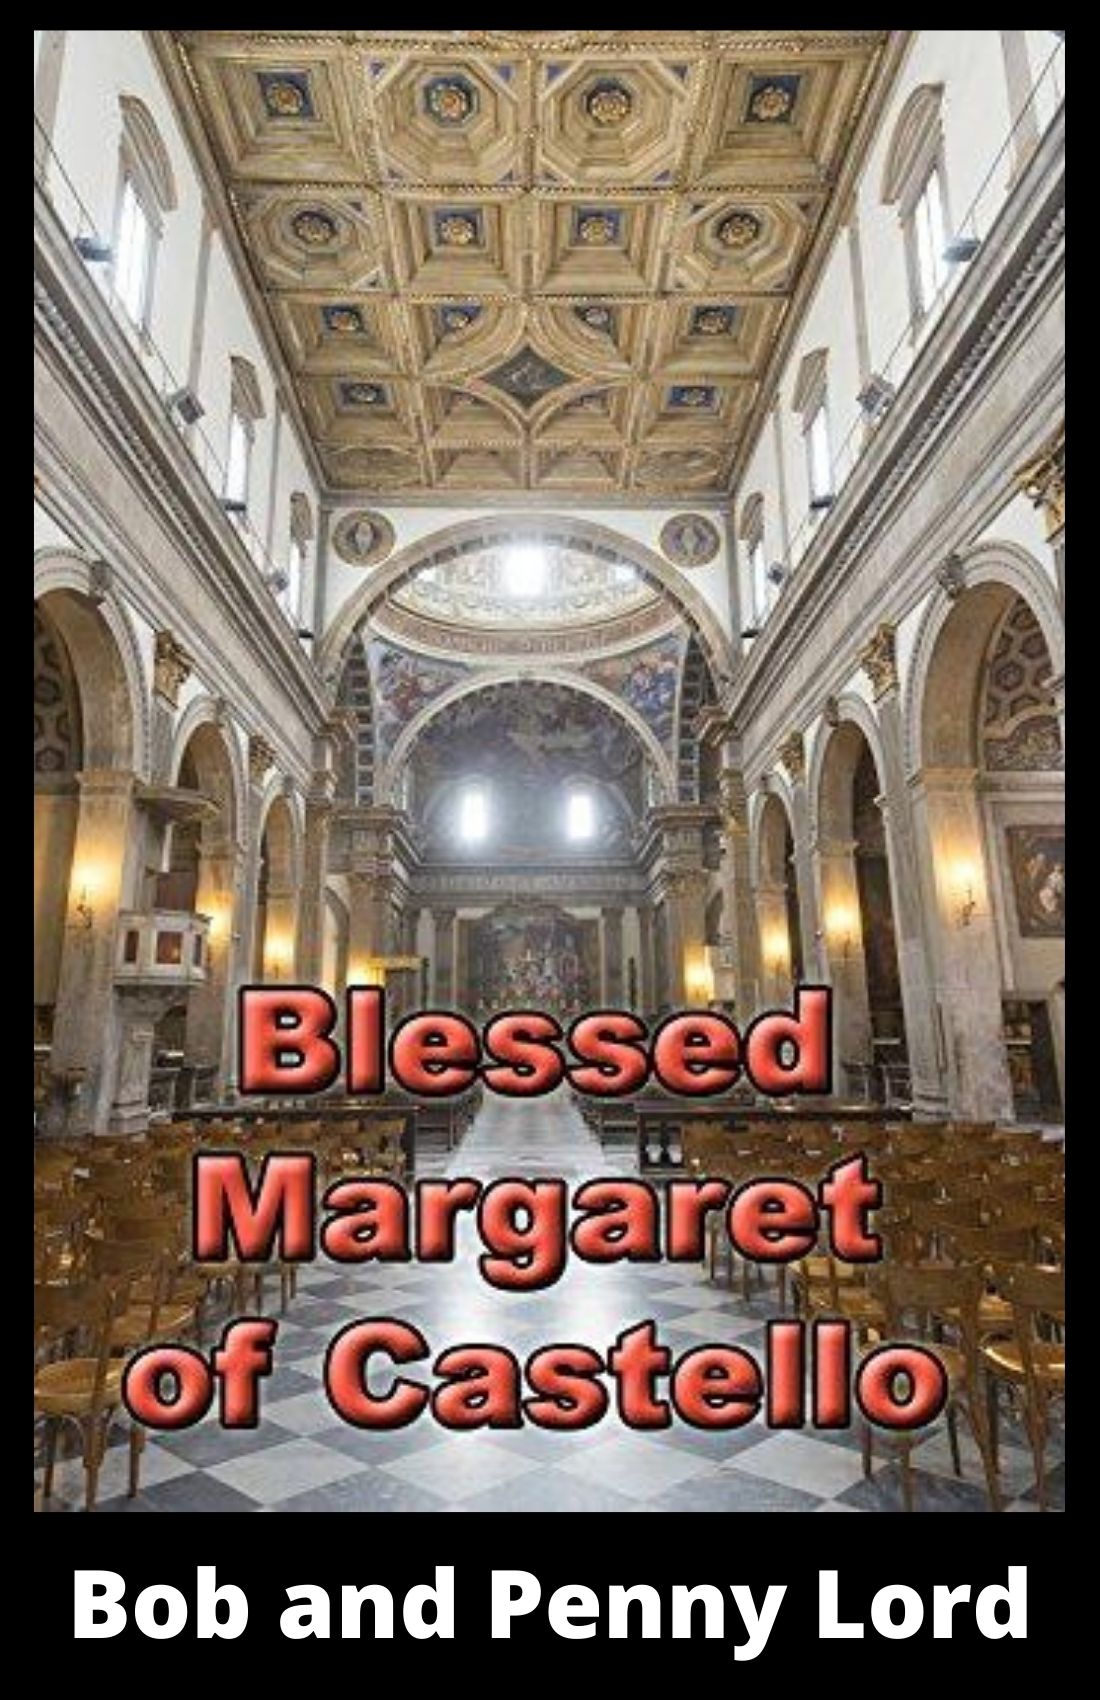 Blessed Margaret of Castello  Minibook - Bob and Penny Lord